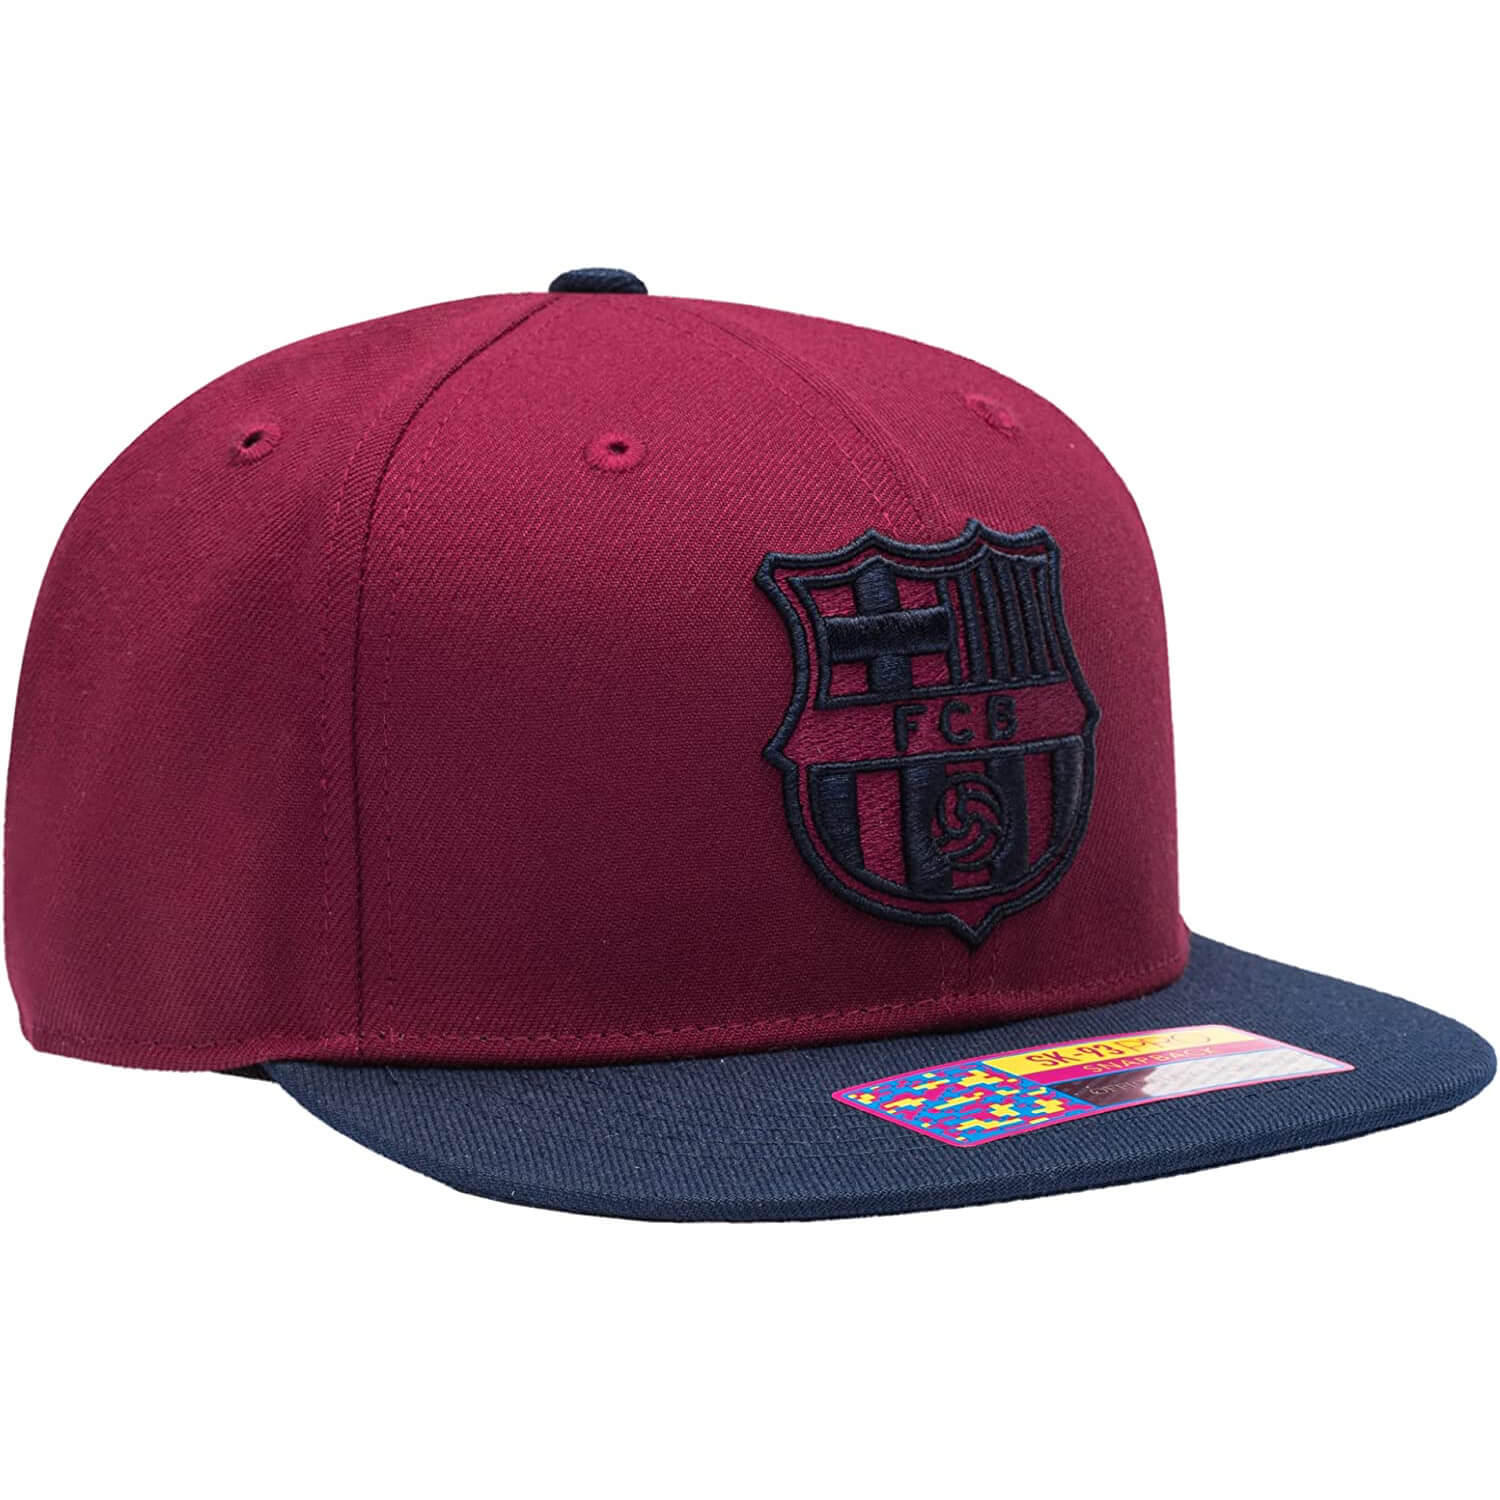 FI Collection Barcelona Team Snapback Hat - Burgundy (Lateral - Side 2)